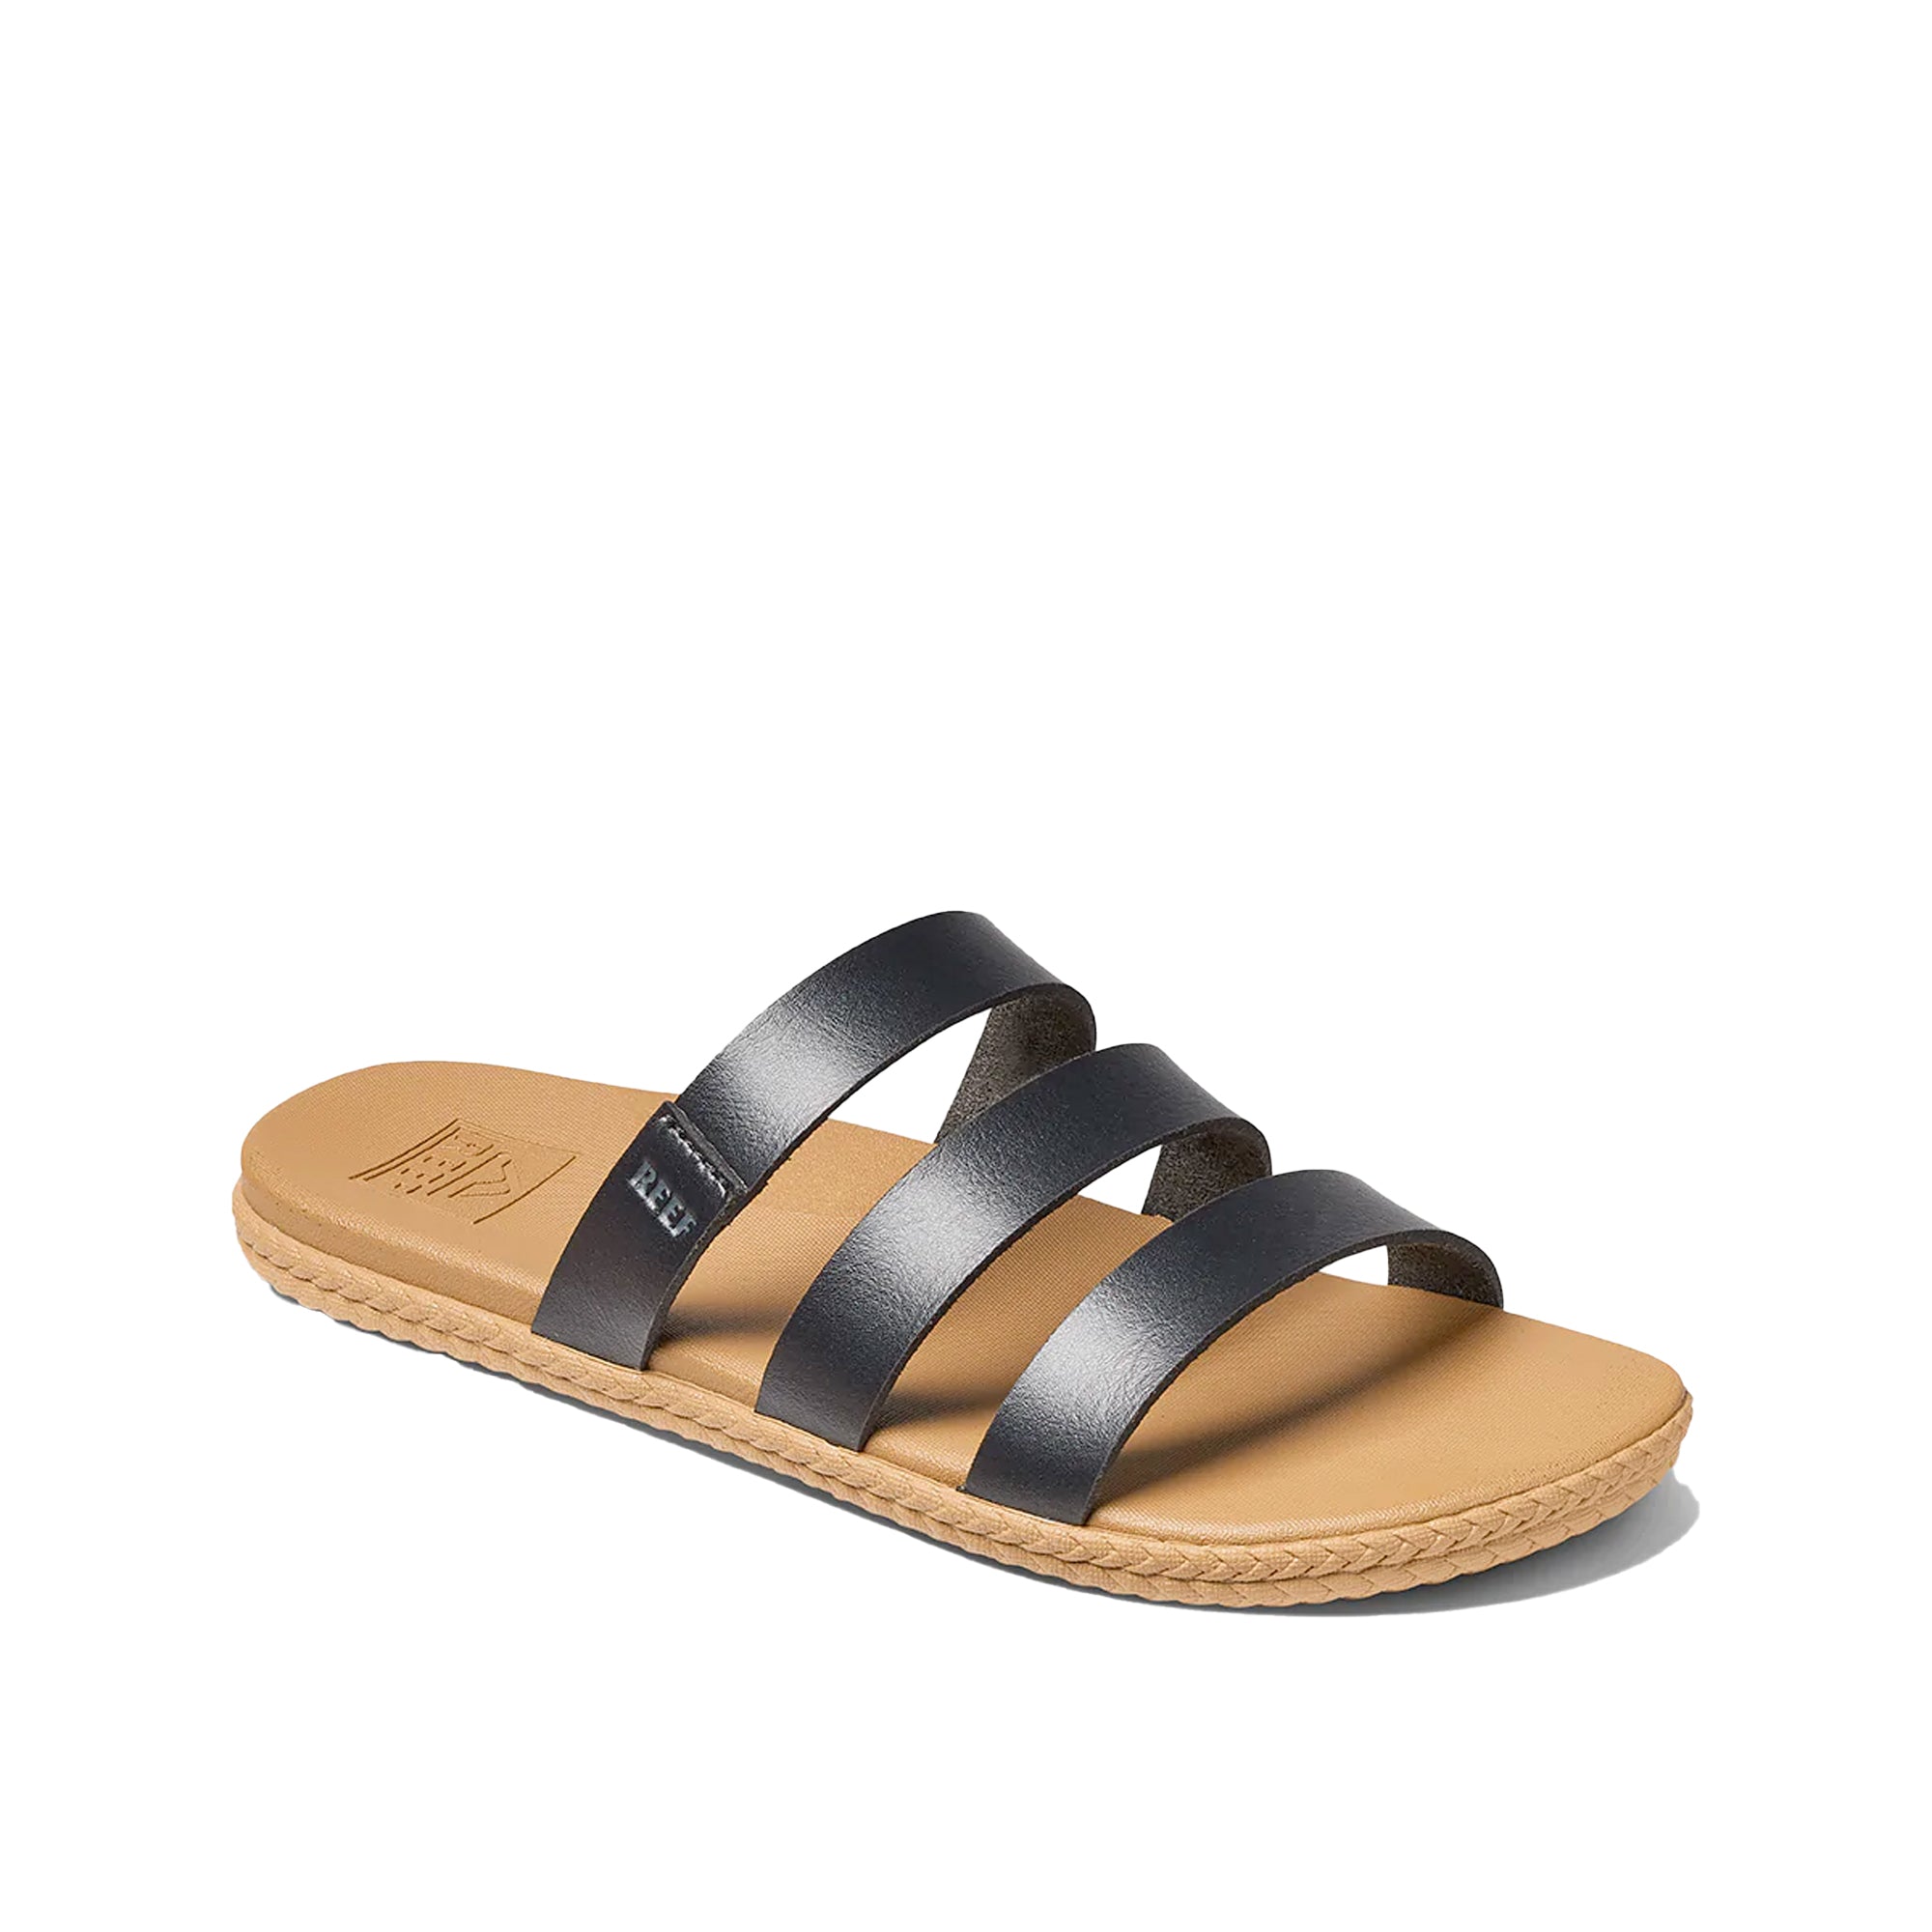 Reef Cushion Ruby Women's Sandals - Surf Station Store